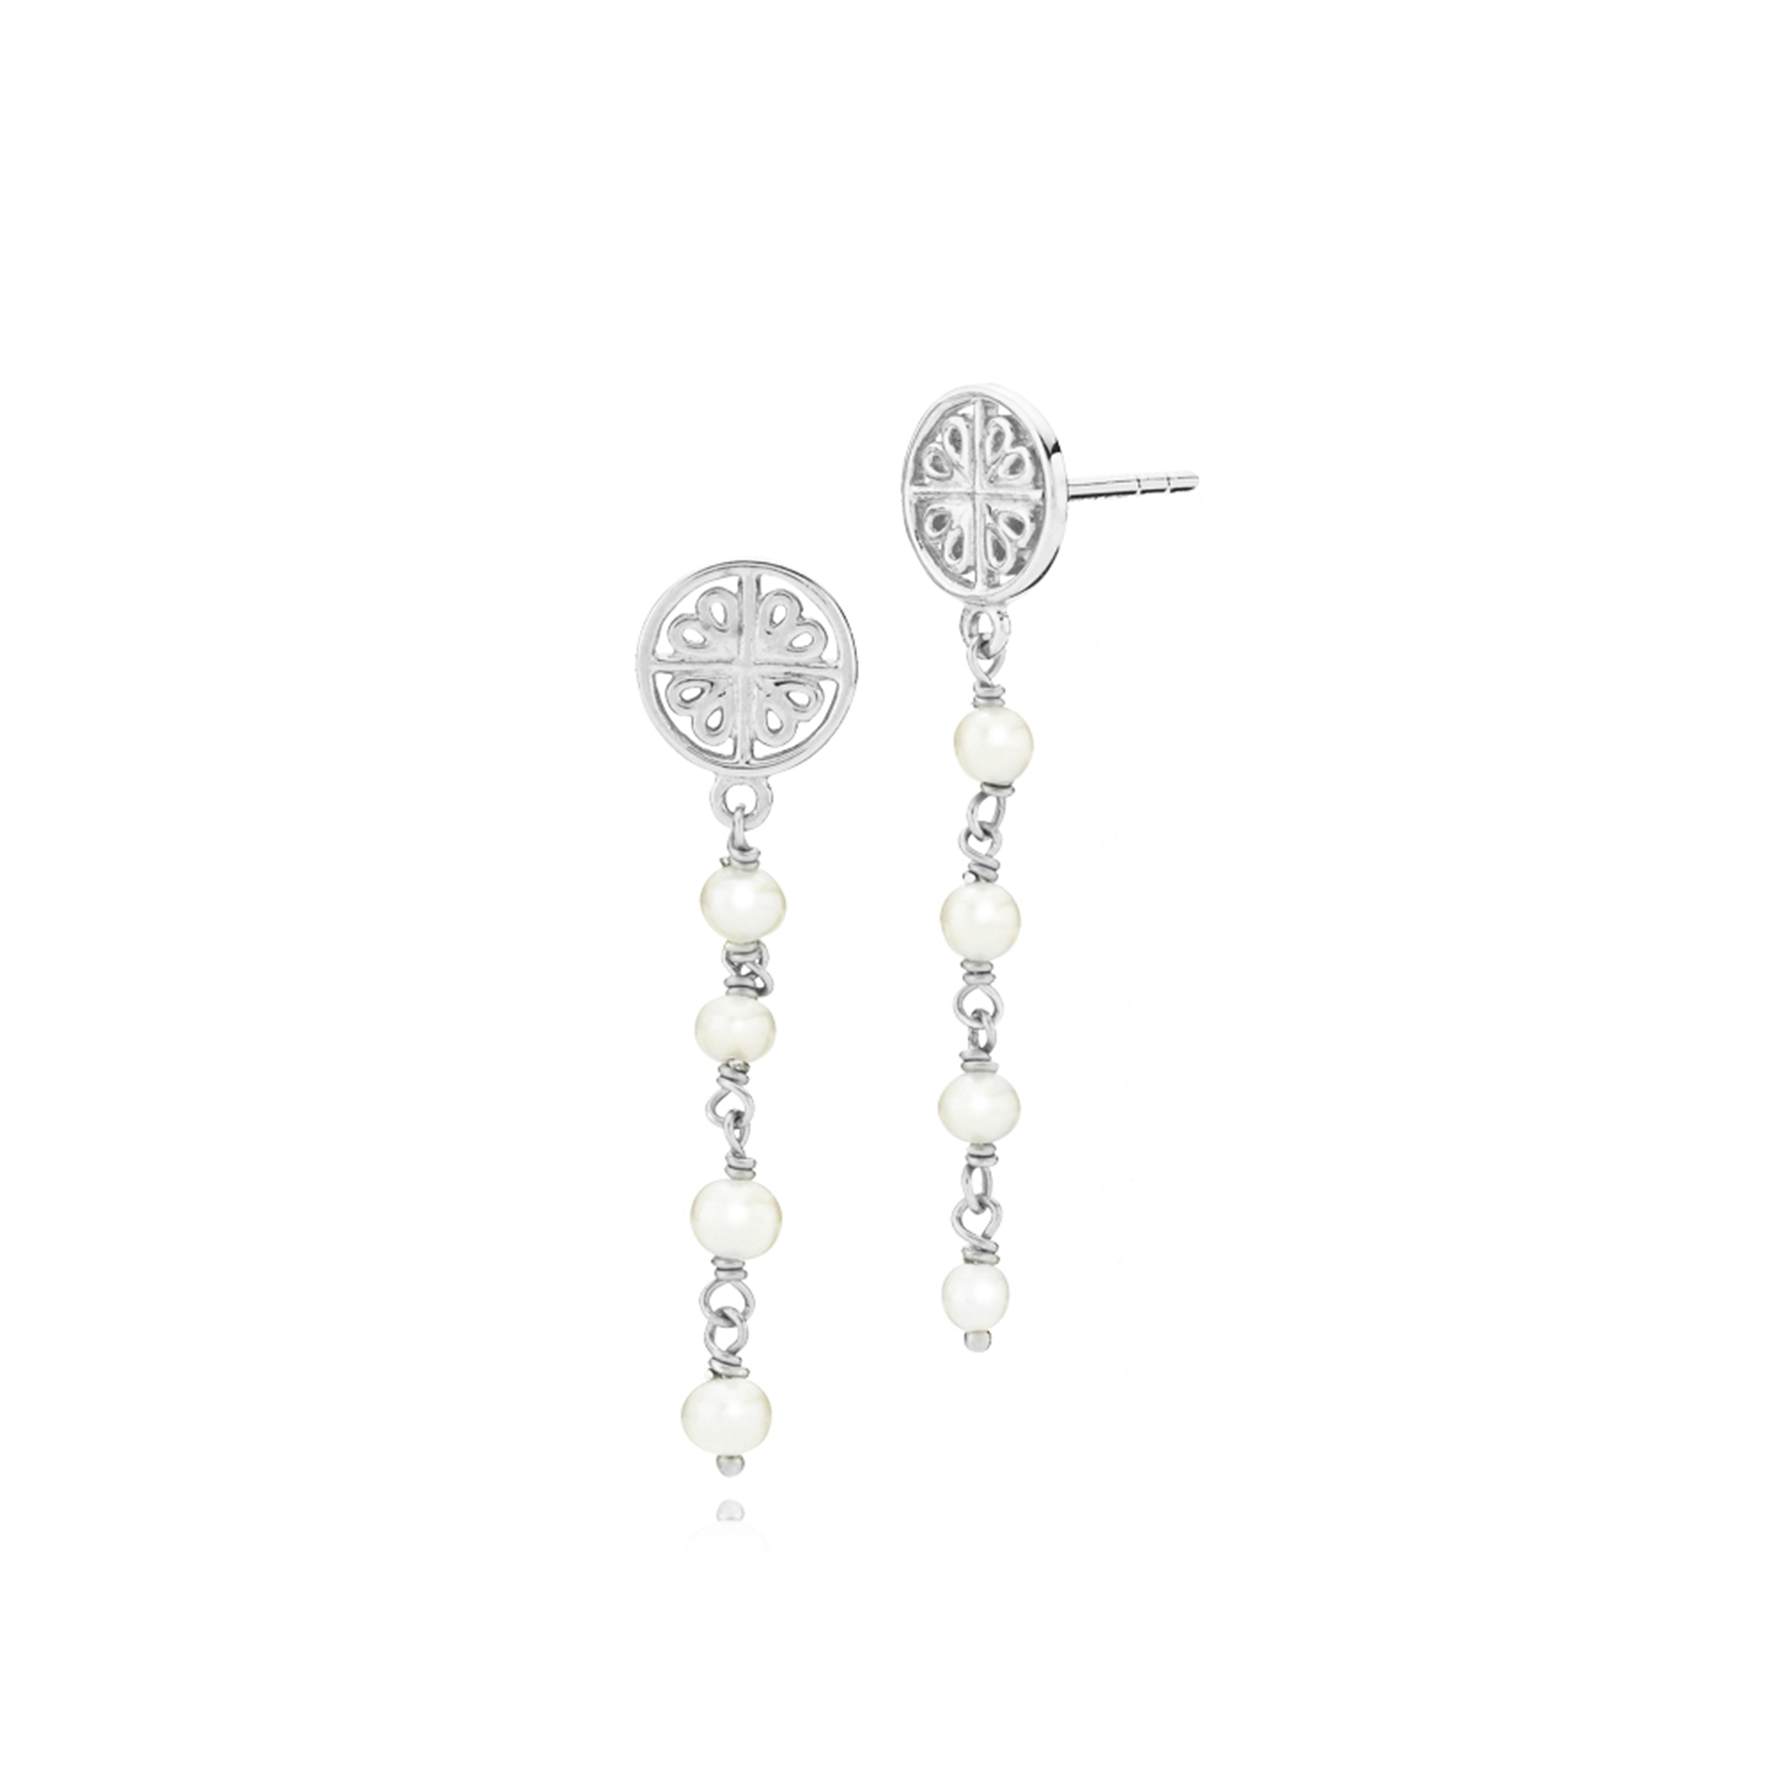 Balance Earrings With Pearl from Sistie in Silver Sterling 925|Freshwater Pearl|Blank